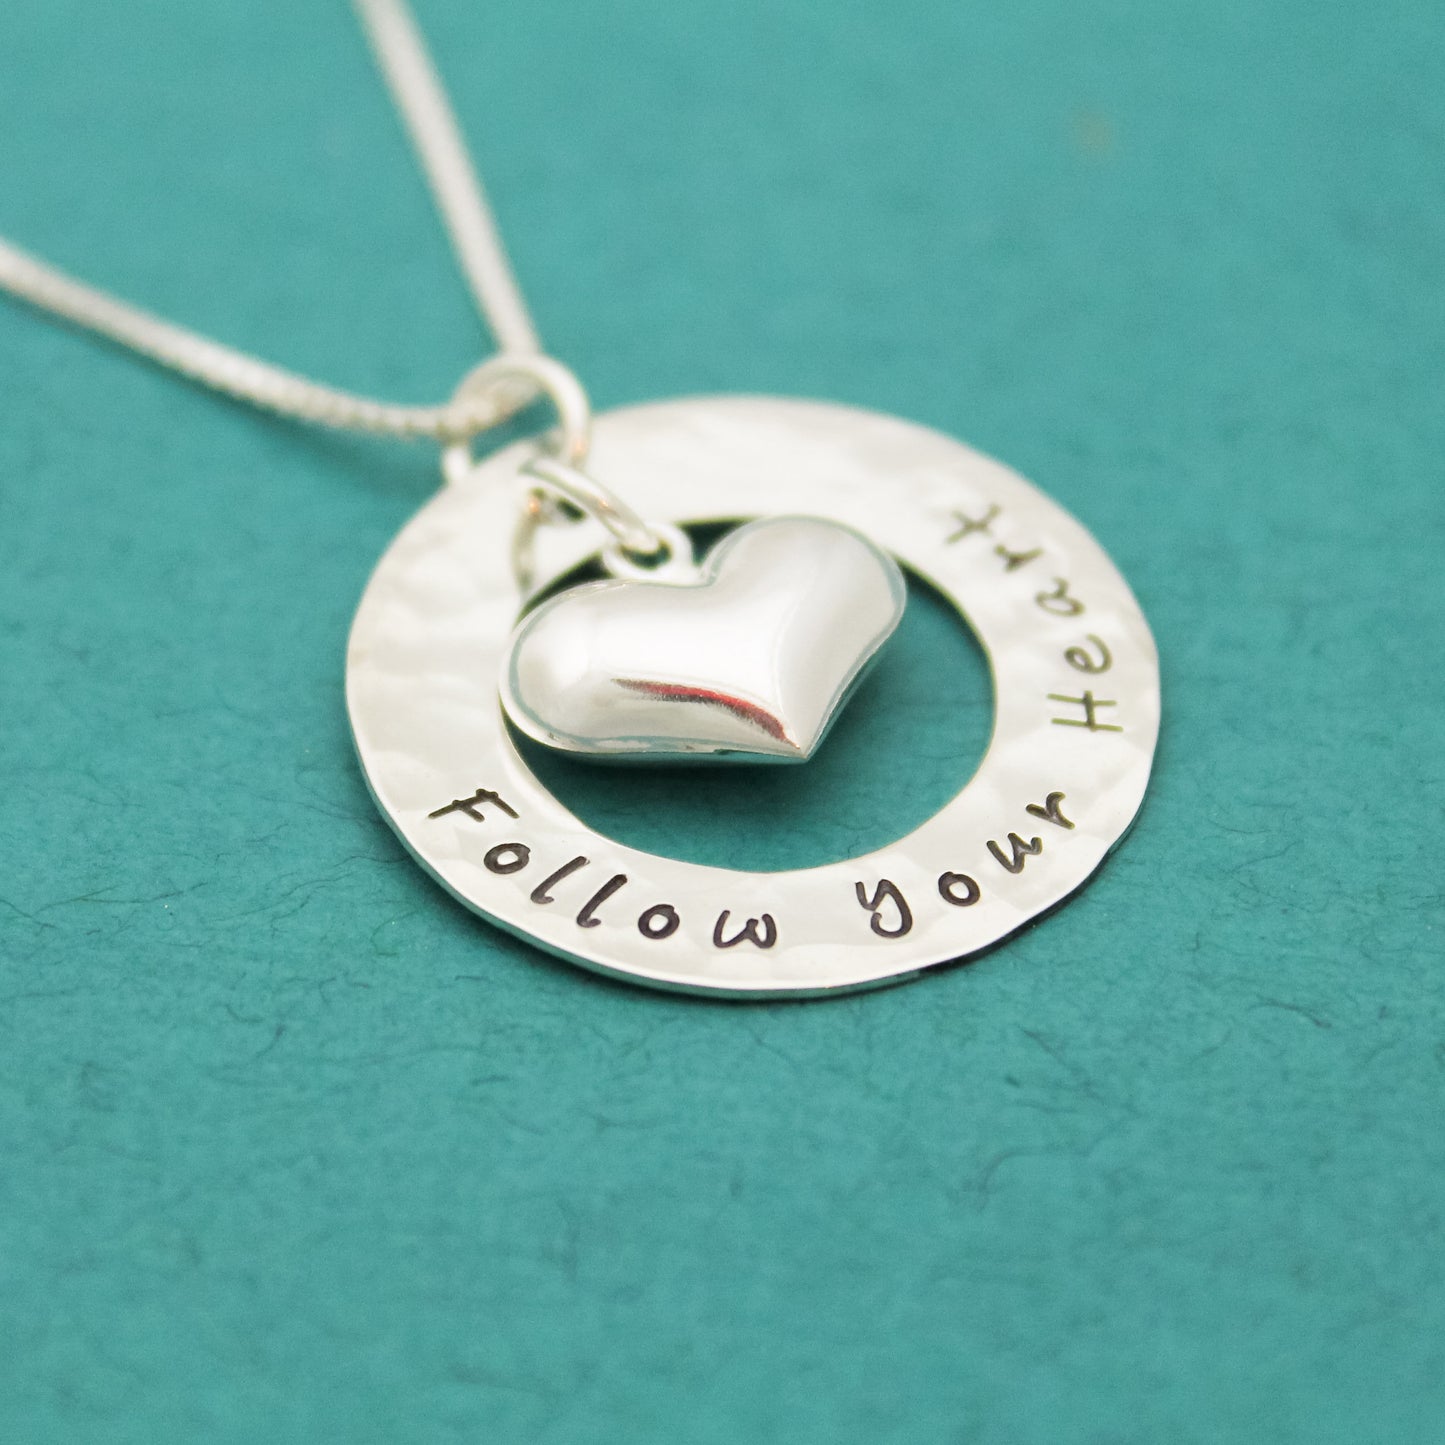 Follow Your Heart Necklace, Follow Your Heart Gift, Graduation Gift, Valentine's Day Gift, Gifts for Her, Heart Jewelry, Grad Gift for Her